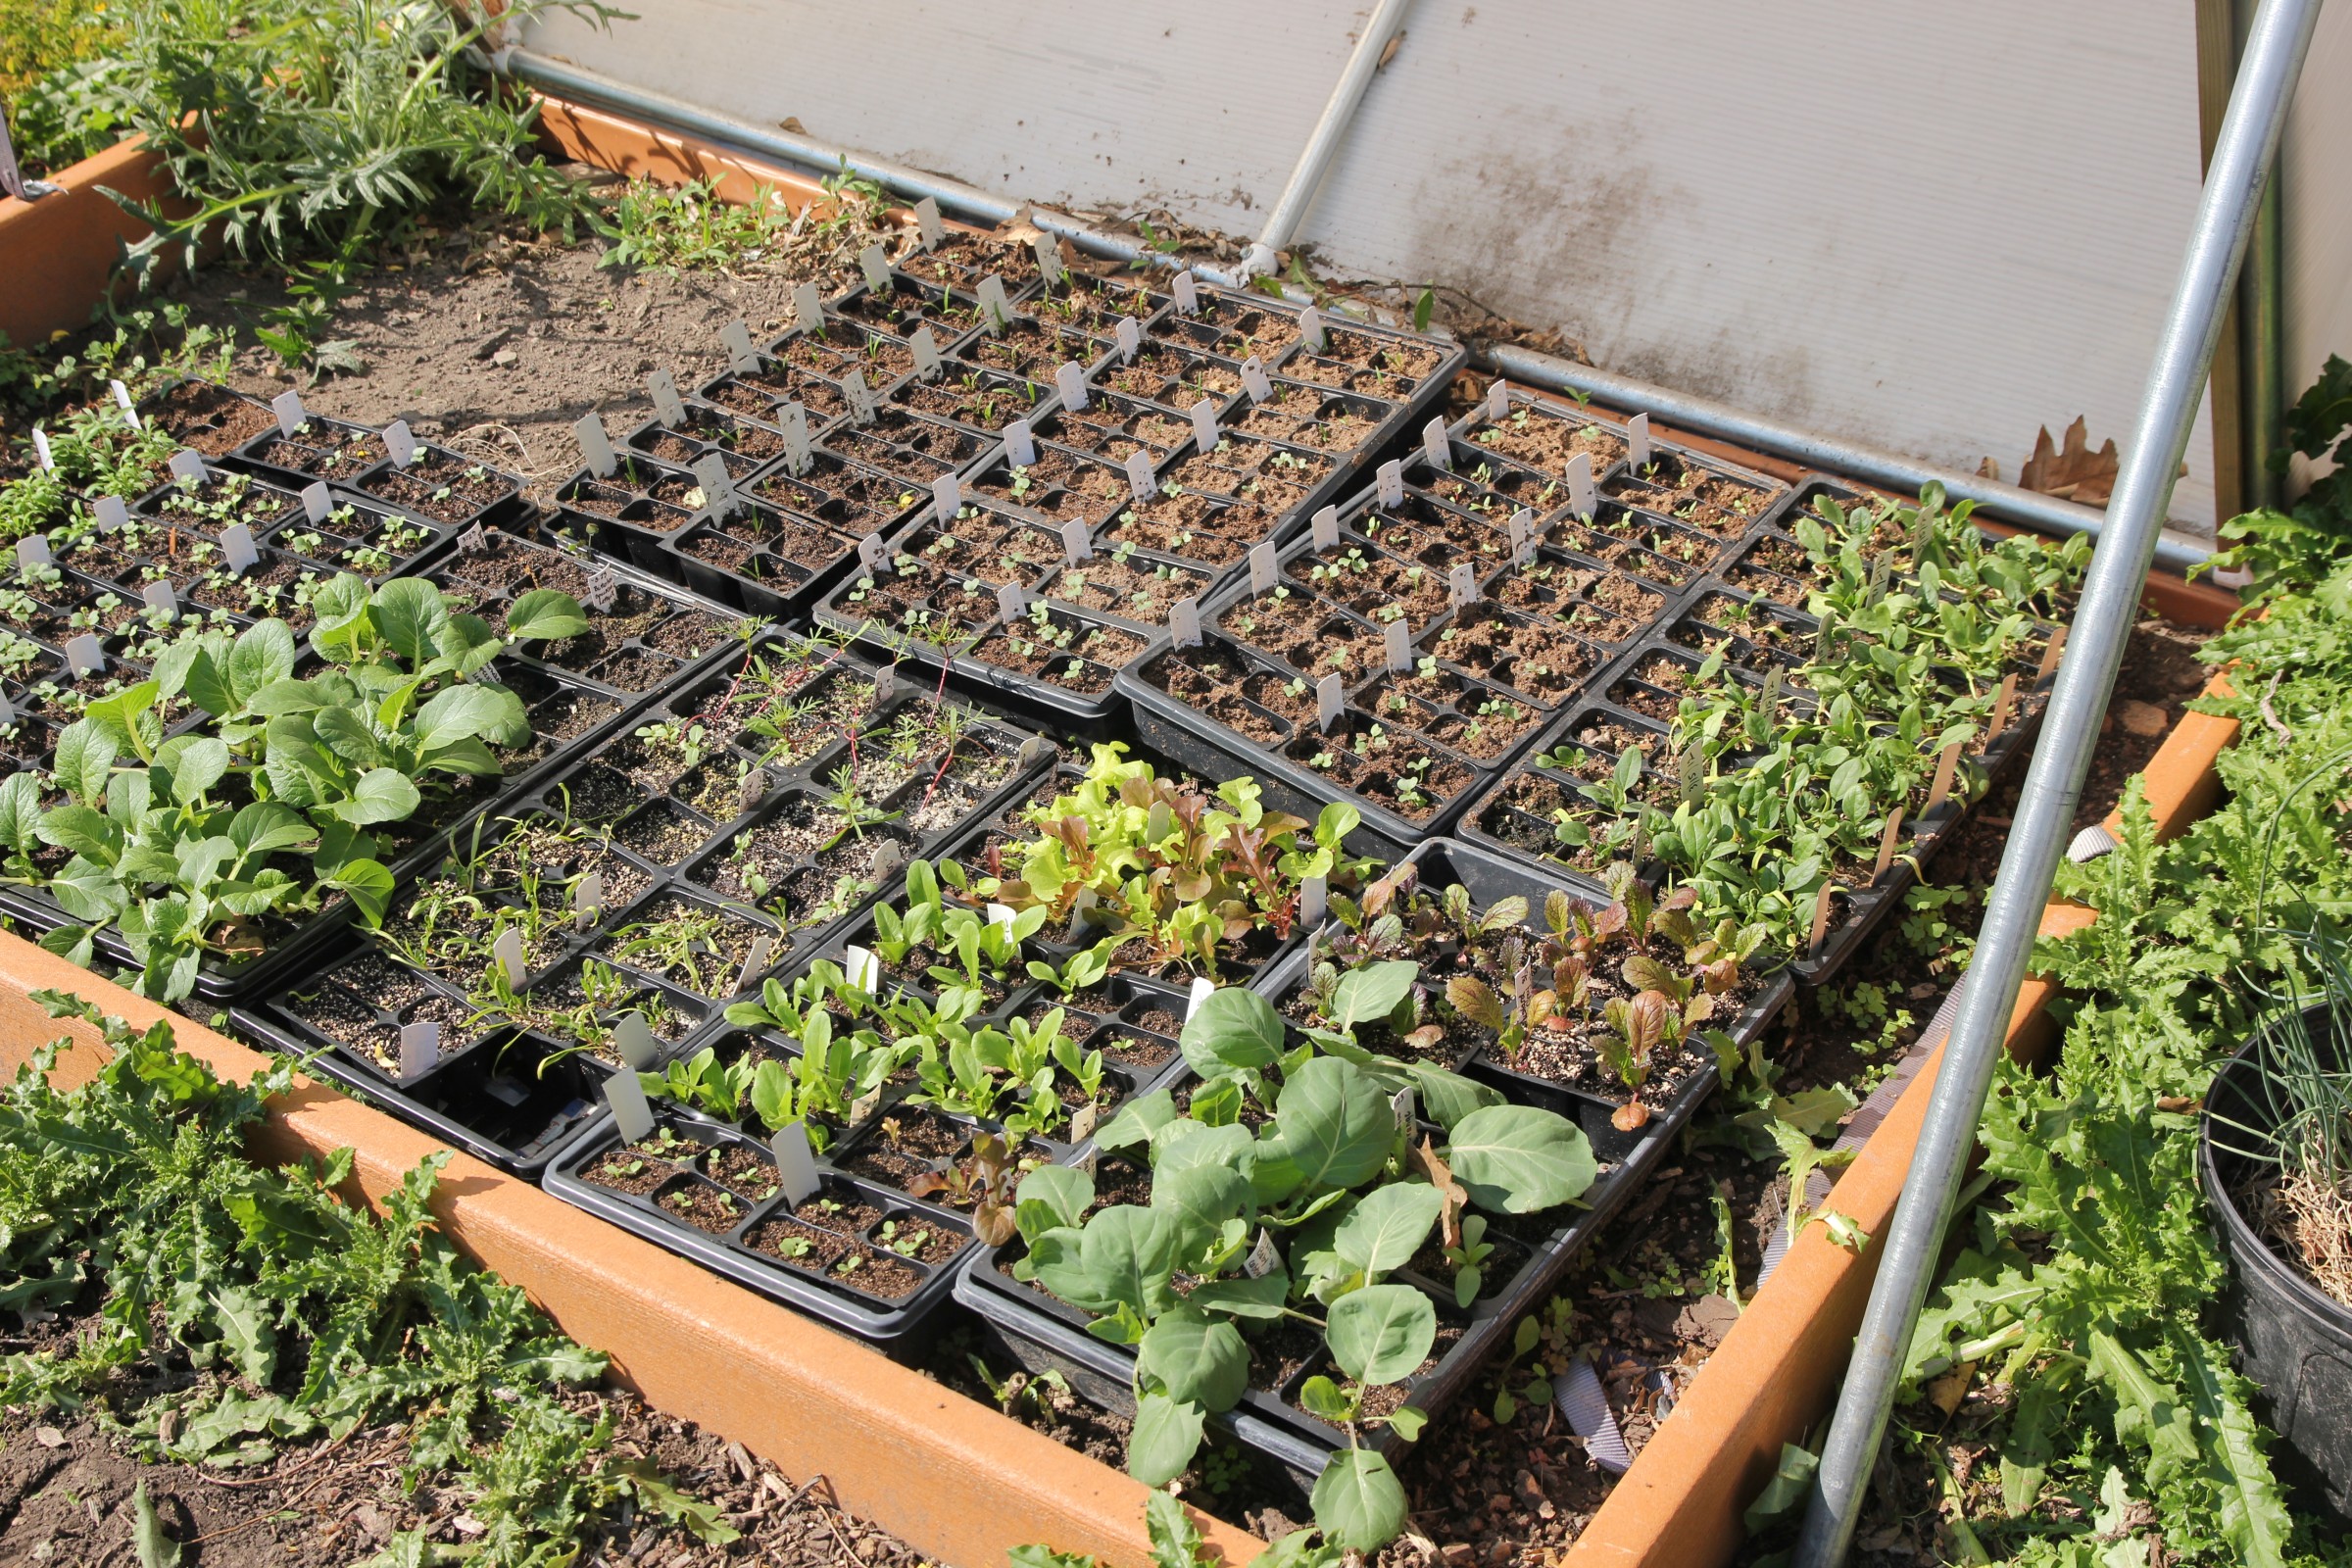 image of a variety of vegetable plants in a coldframe